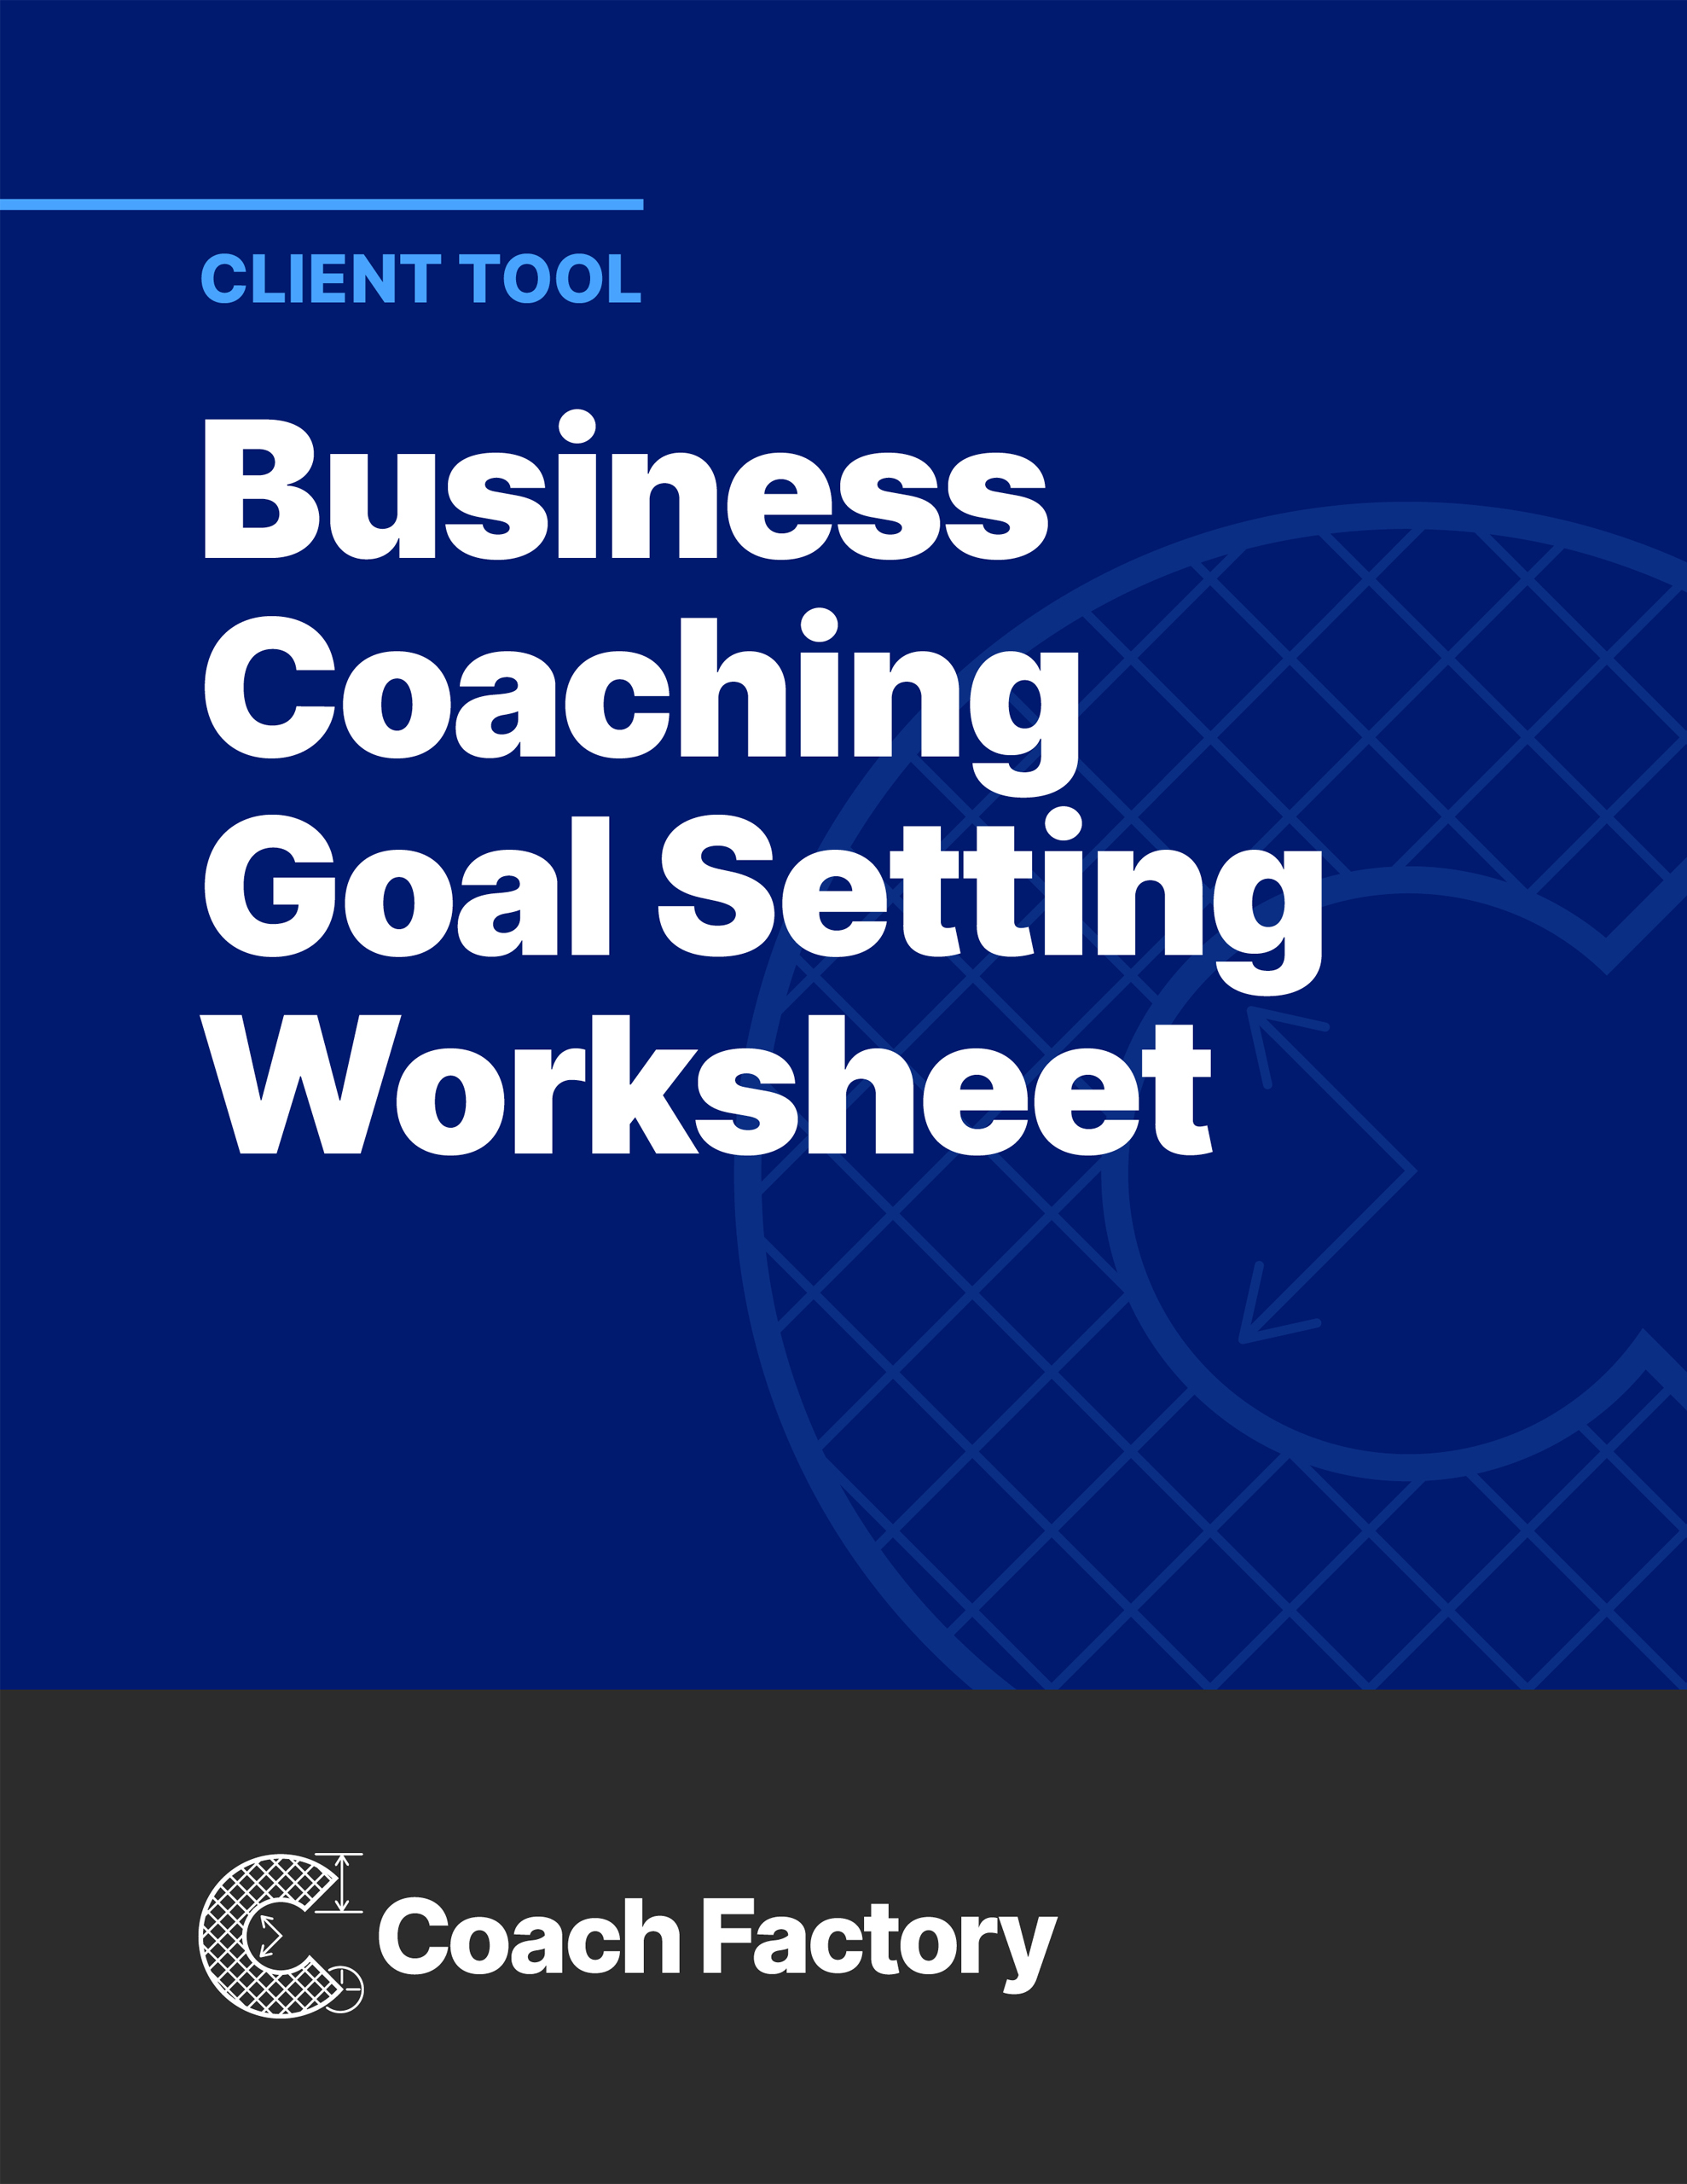 Client Tool Business Coaching Goal Setting Worksheet